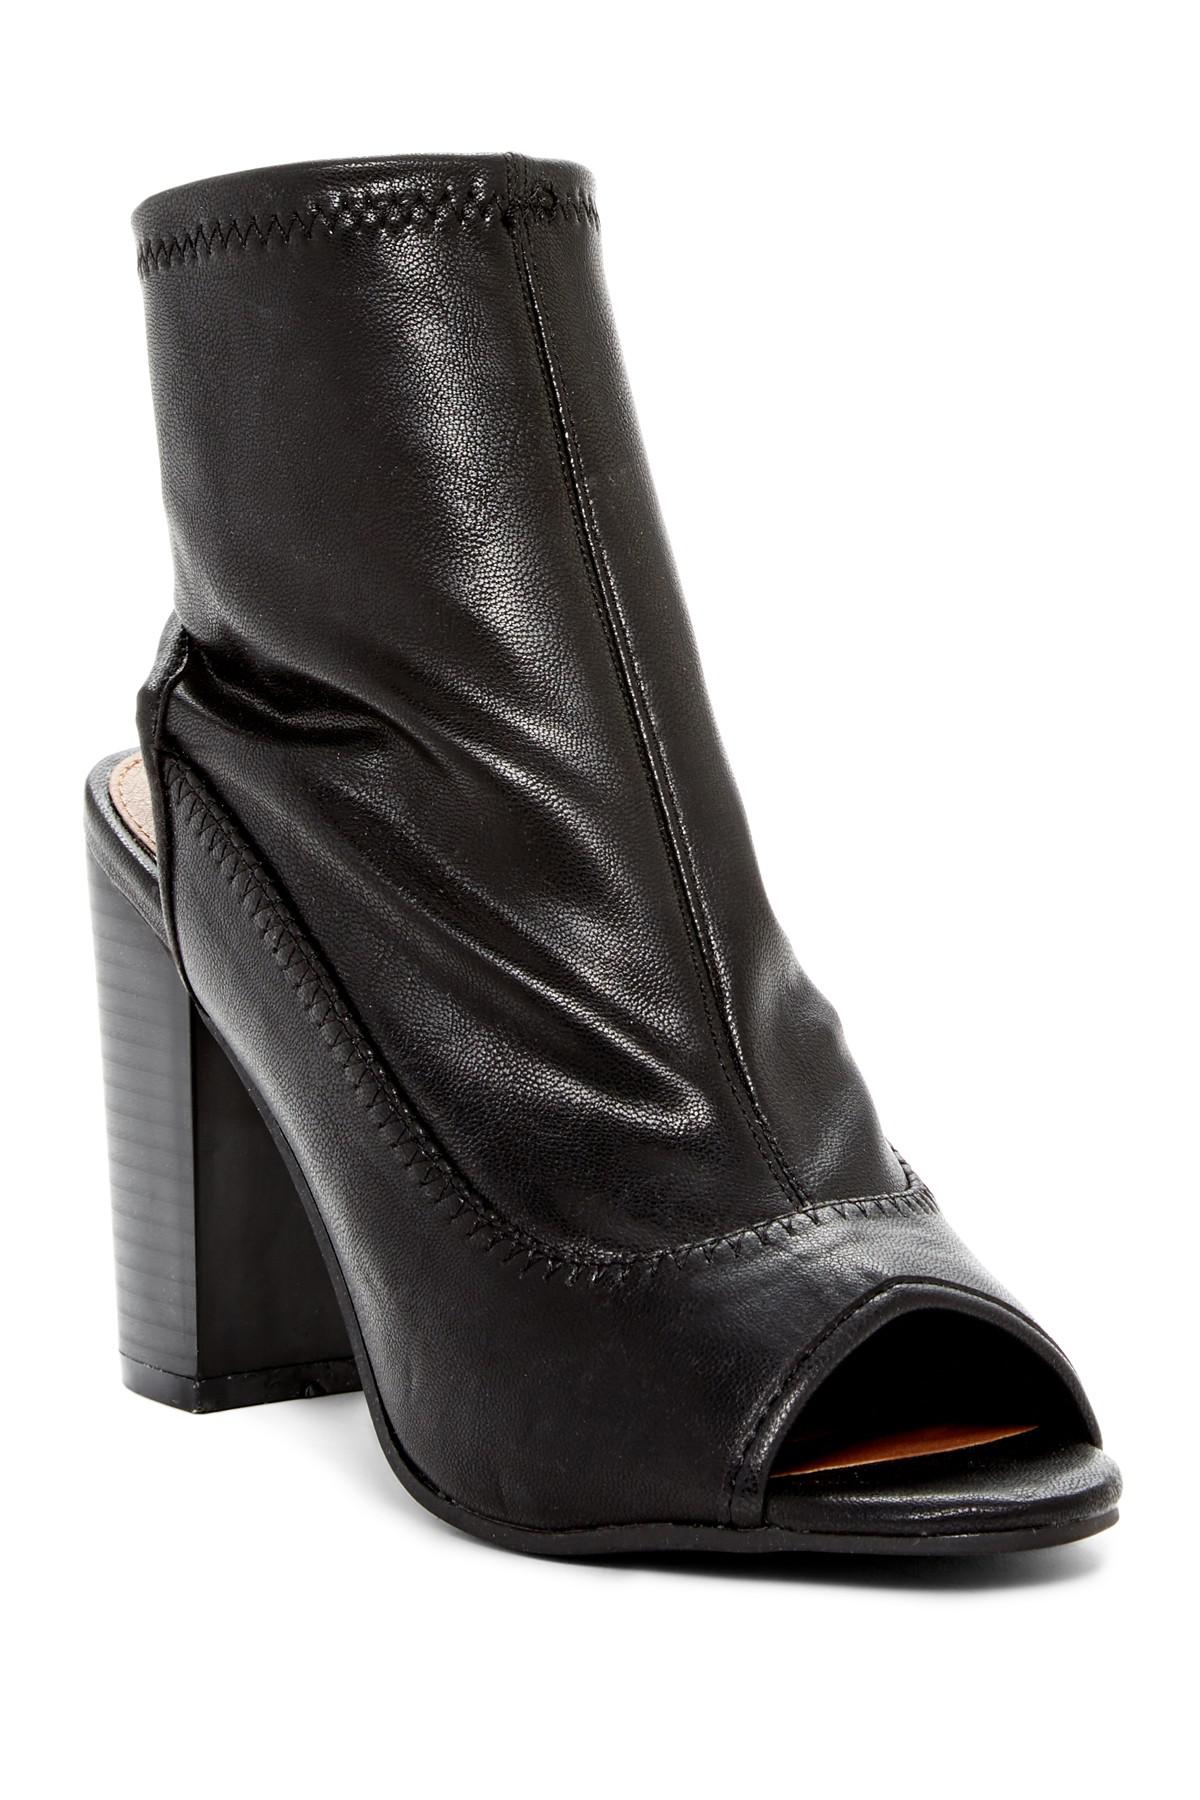 Lyst - Rampage Tionna Peep Toe Ankle Boot in Black